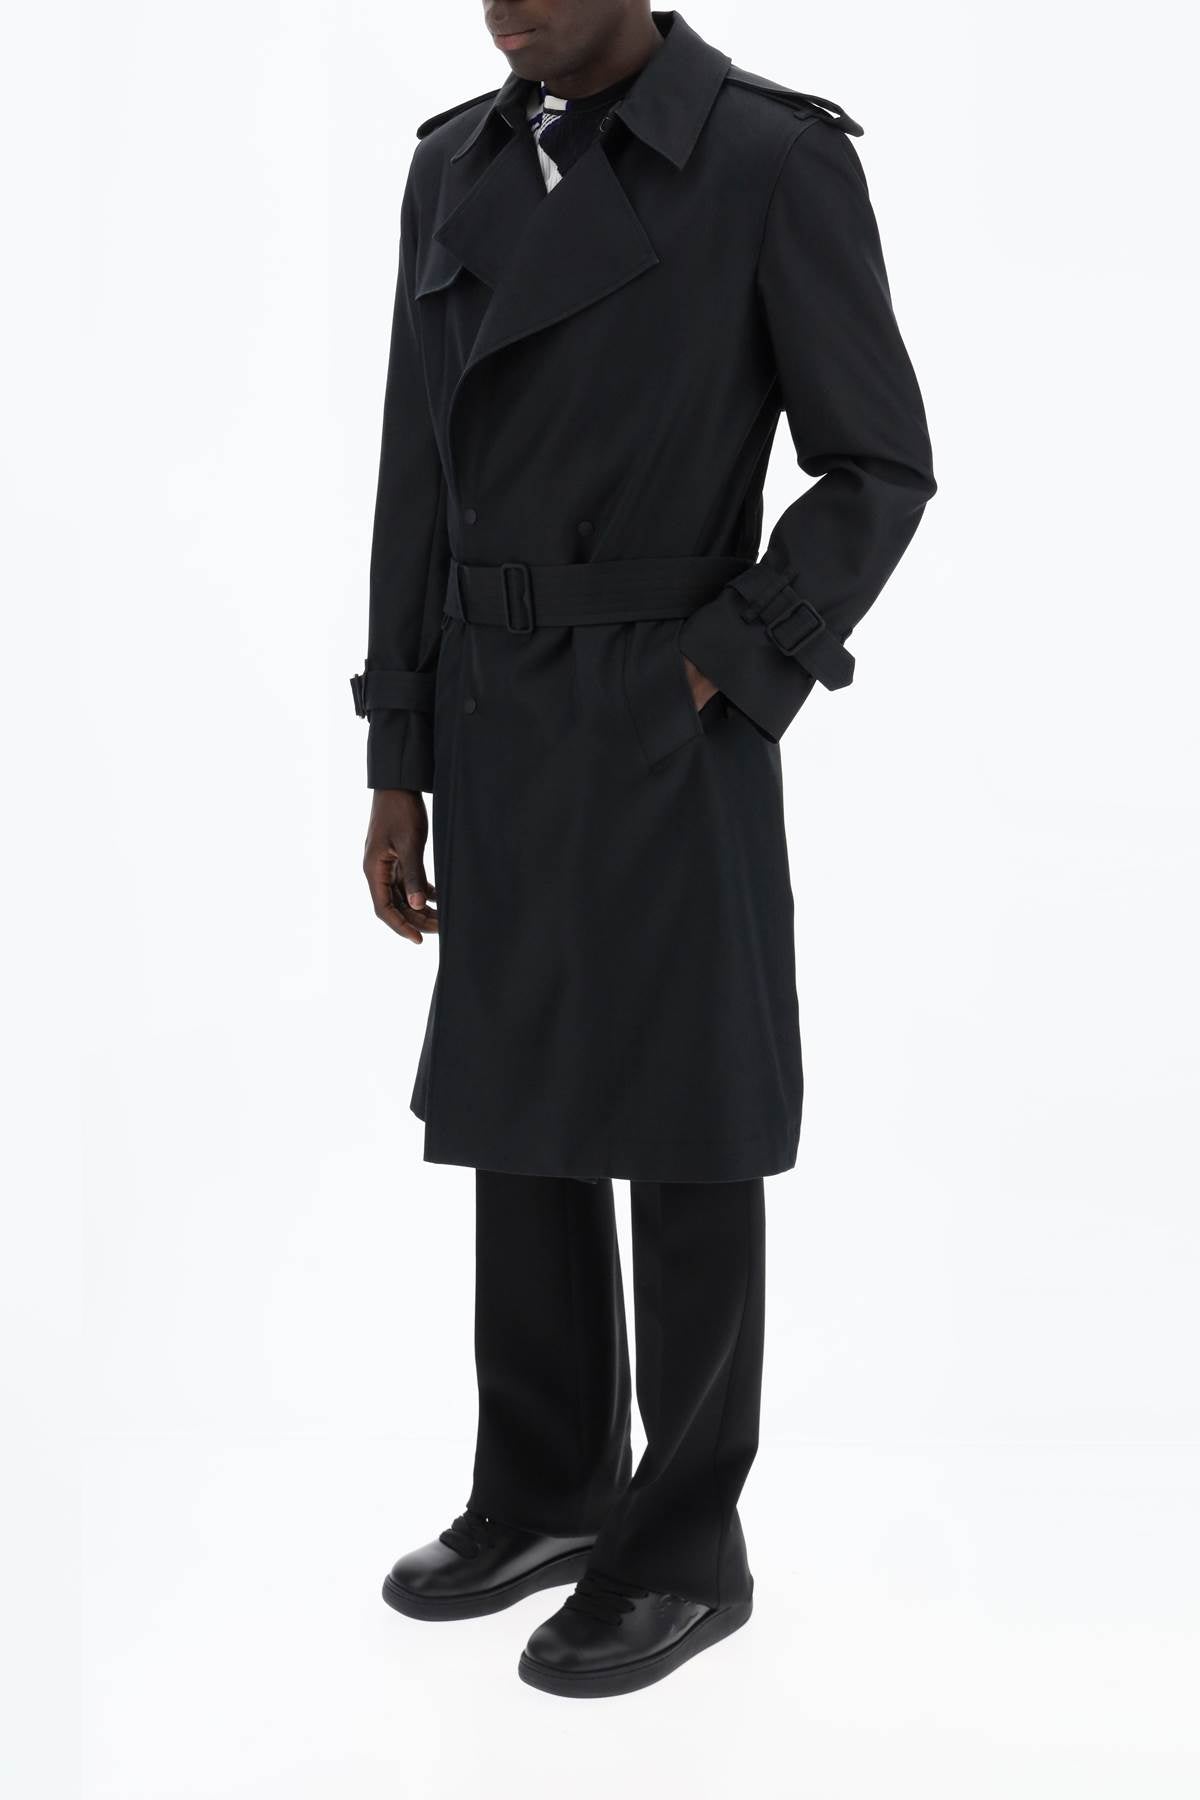 Burberry Double-Breasted Silk Blend Trench Coat (Size - 48)